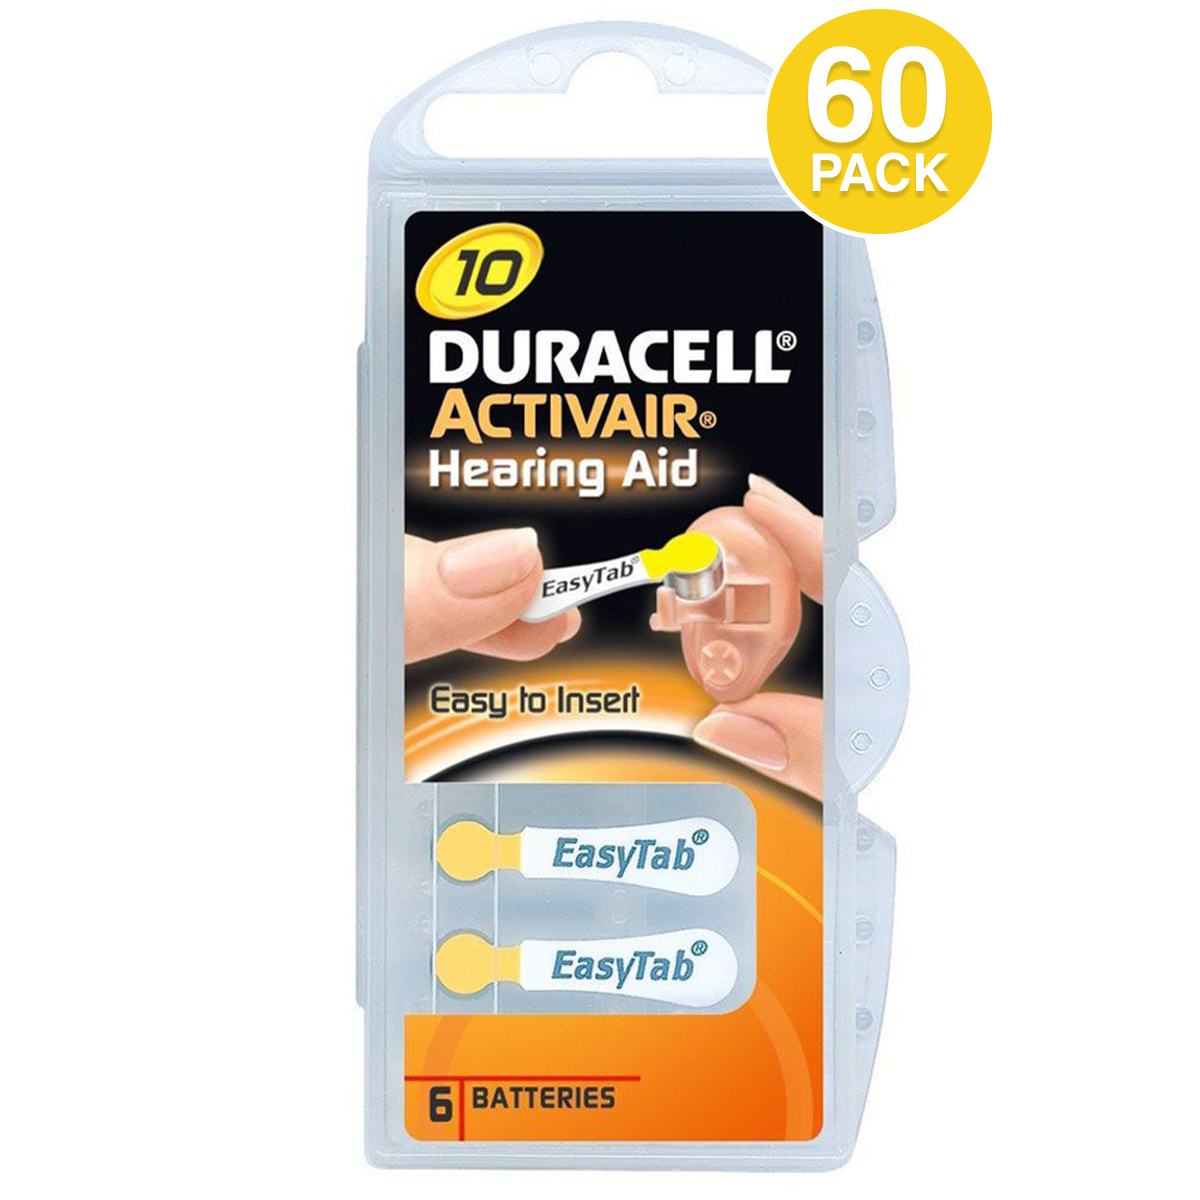 Duracell Activair Size 10 Hearing Aid Battery (60 PCS)